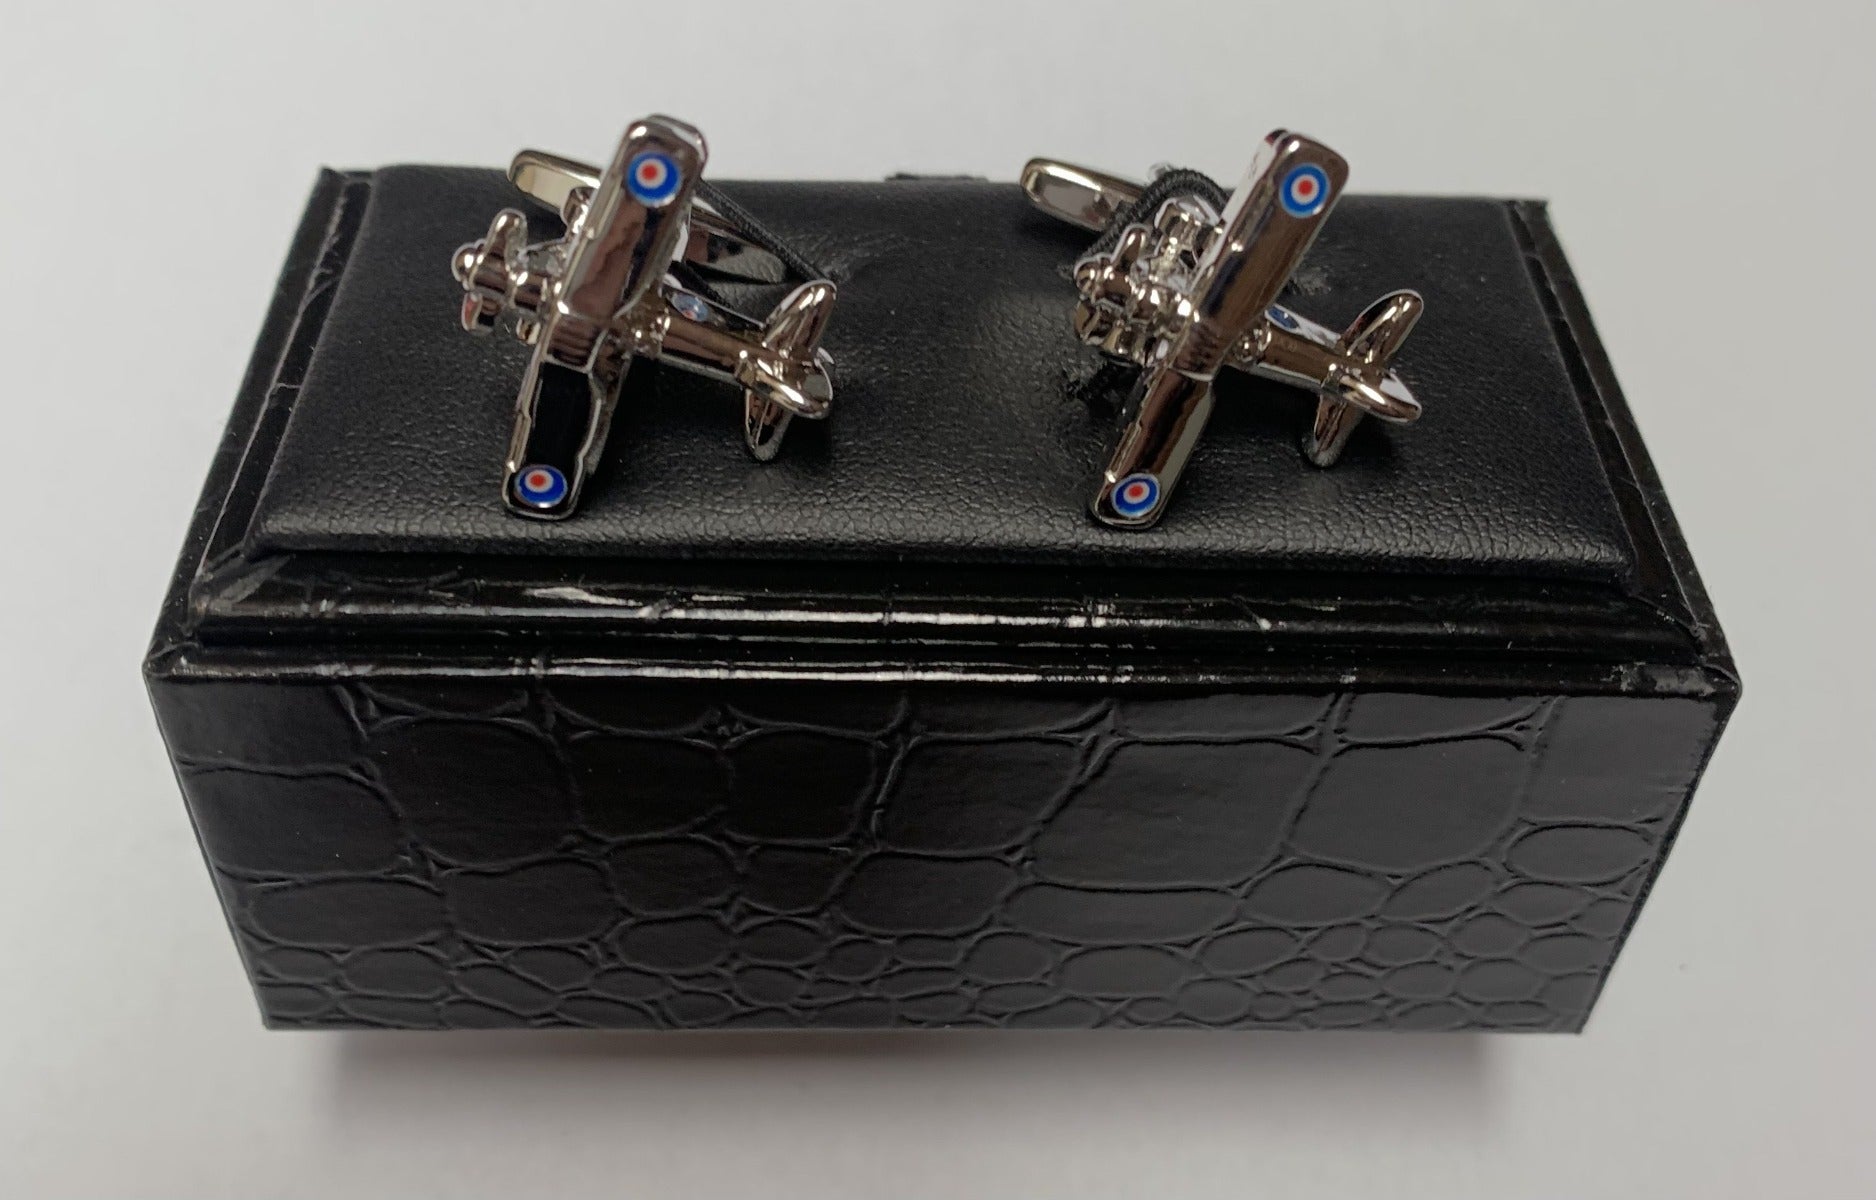 A pair of beautifully detailed cufflinks from Regent, shaped like the famous Spitfire plane, with coloured target on wings.